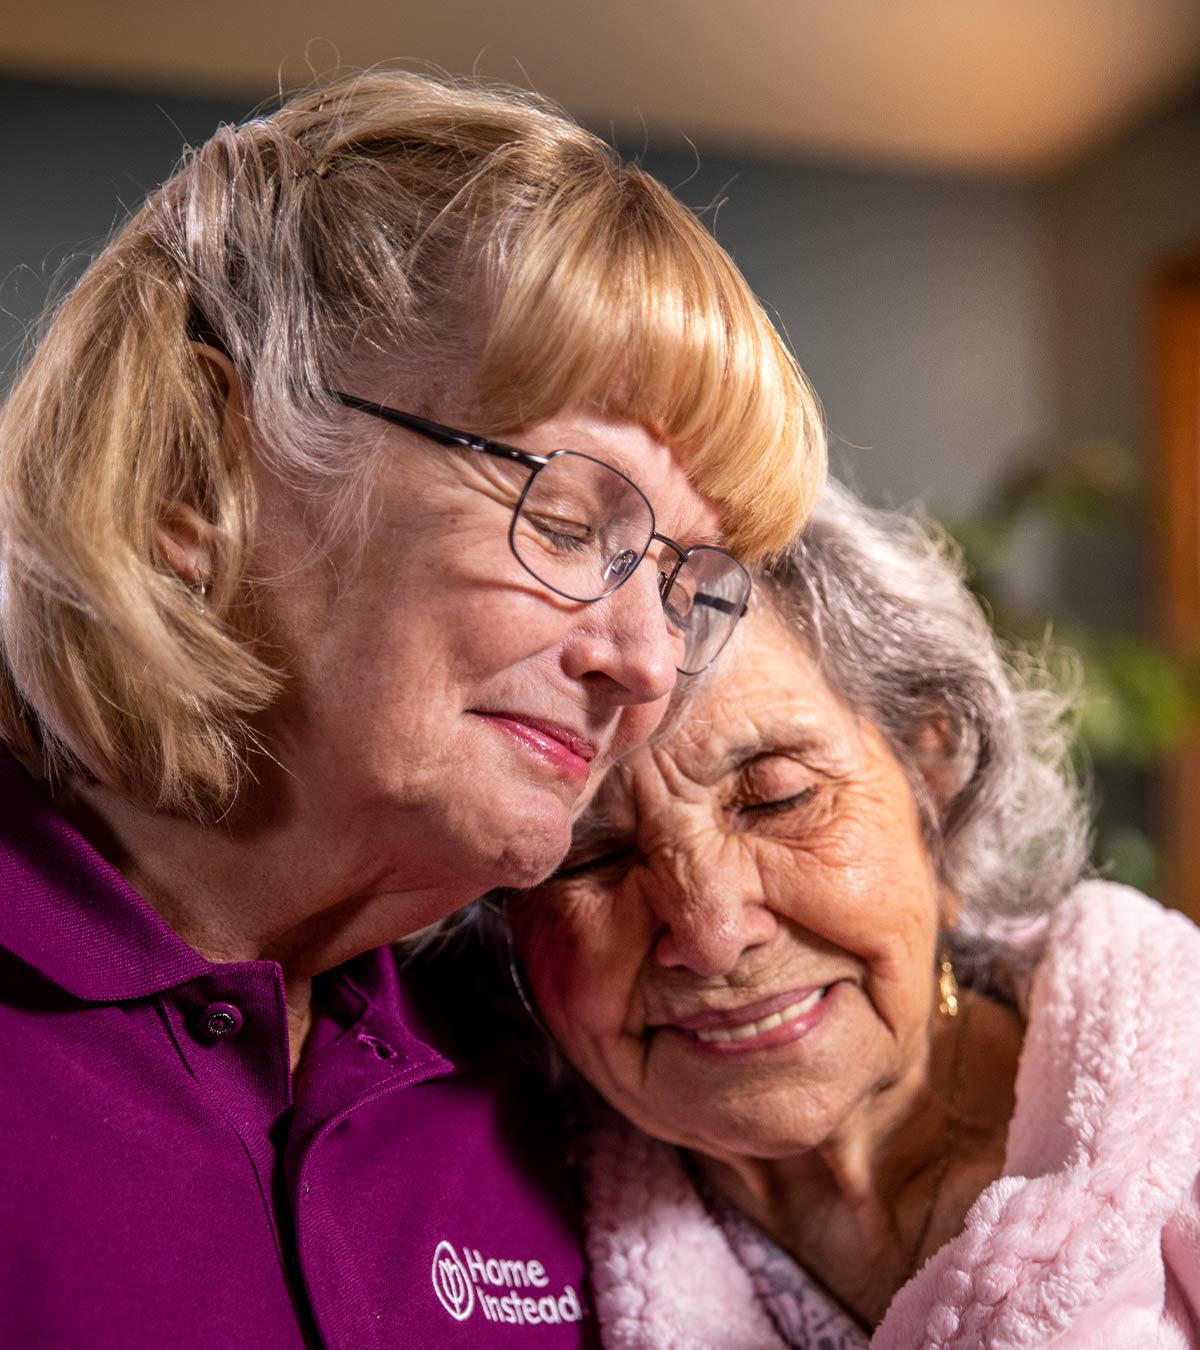 CAREGiver providing in-home senior care services. Home Instead of Whitby, ON provides Elder Care to aging adults. 